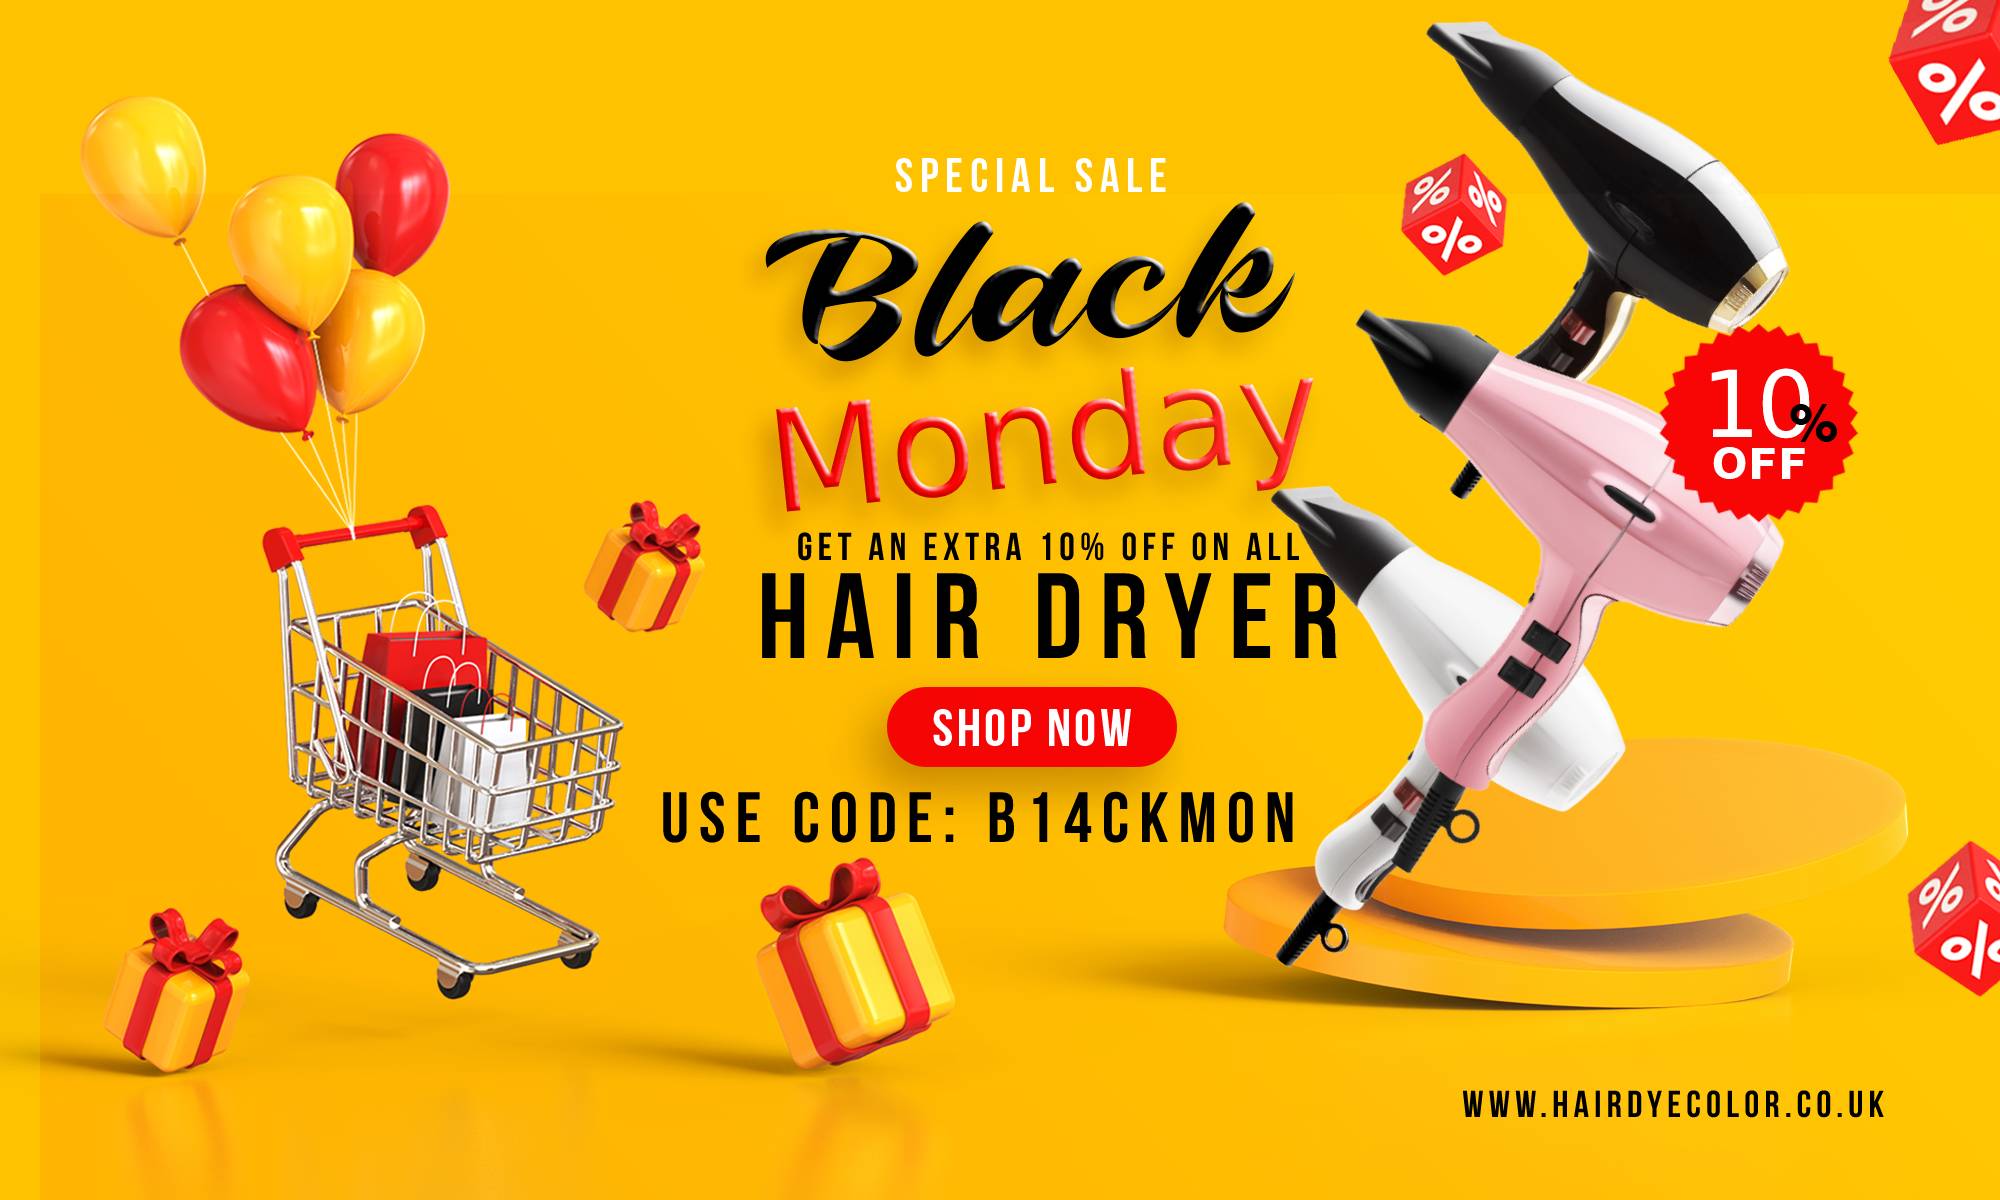 Sale for hair dryer